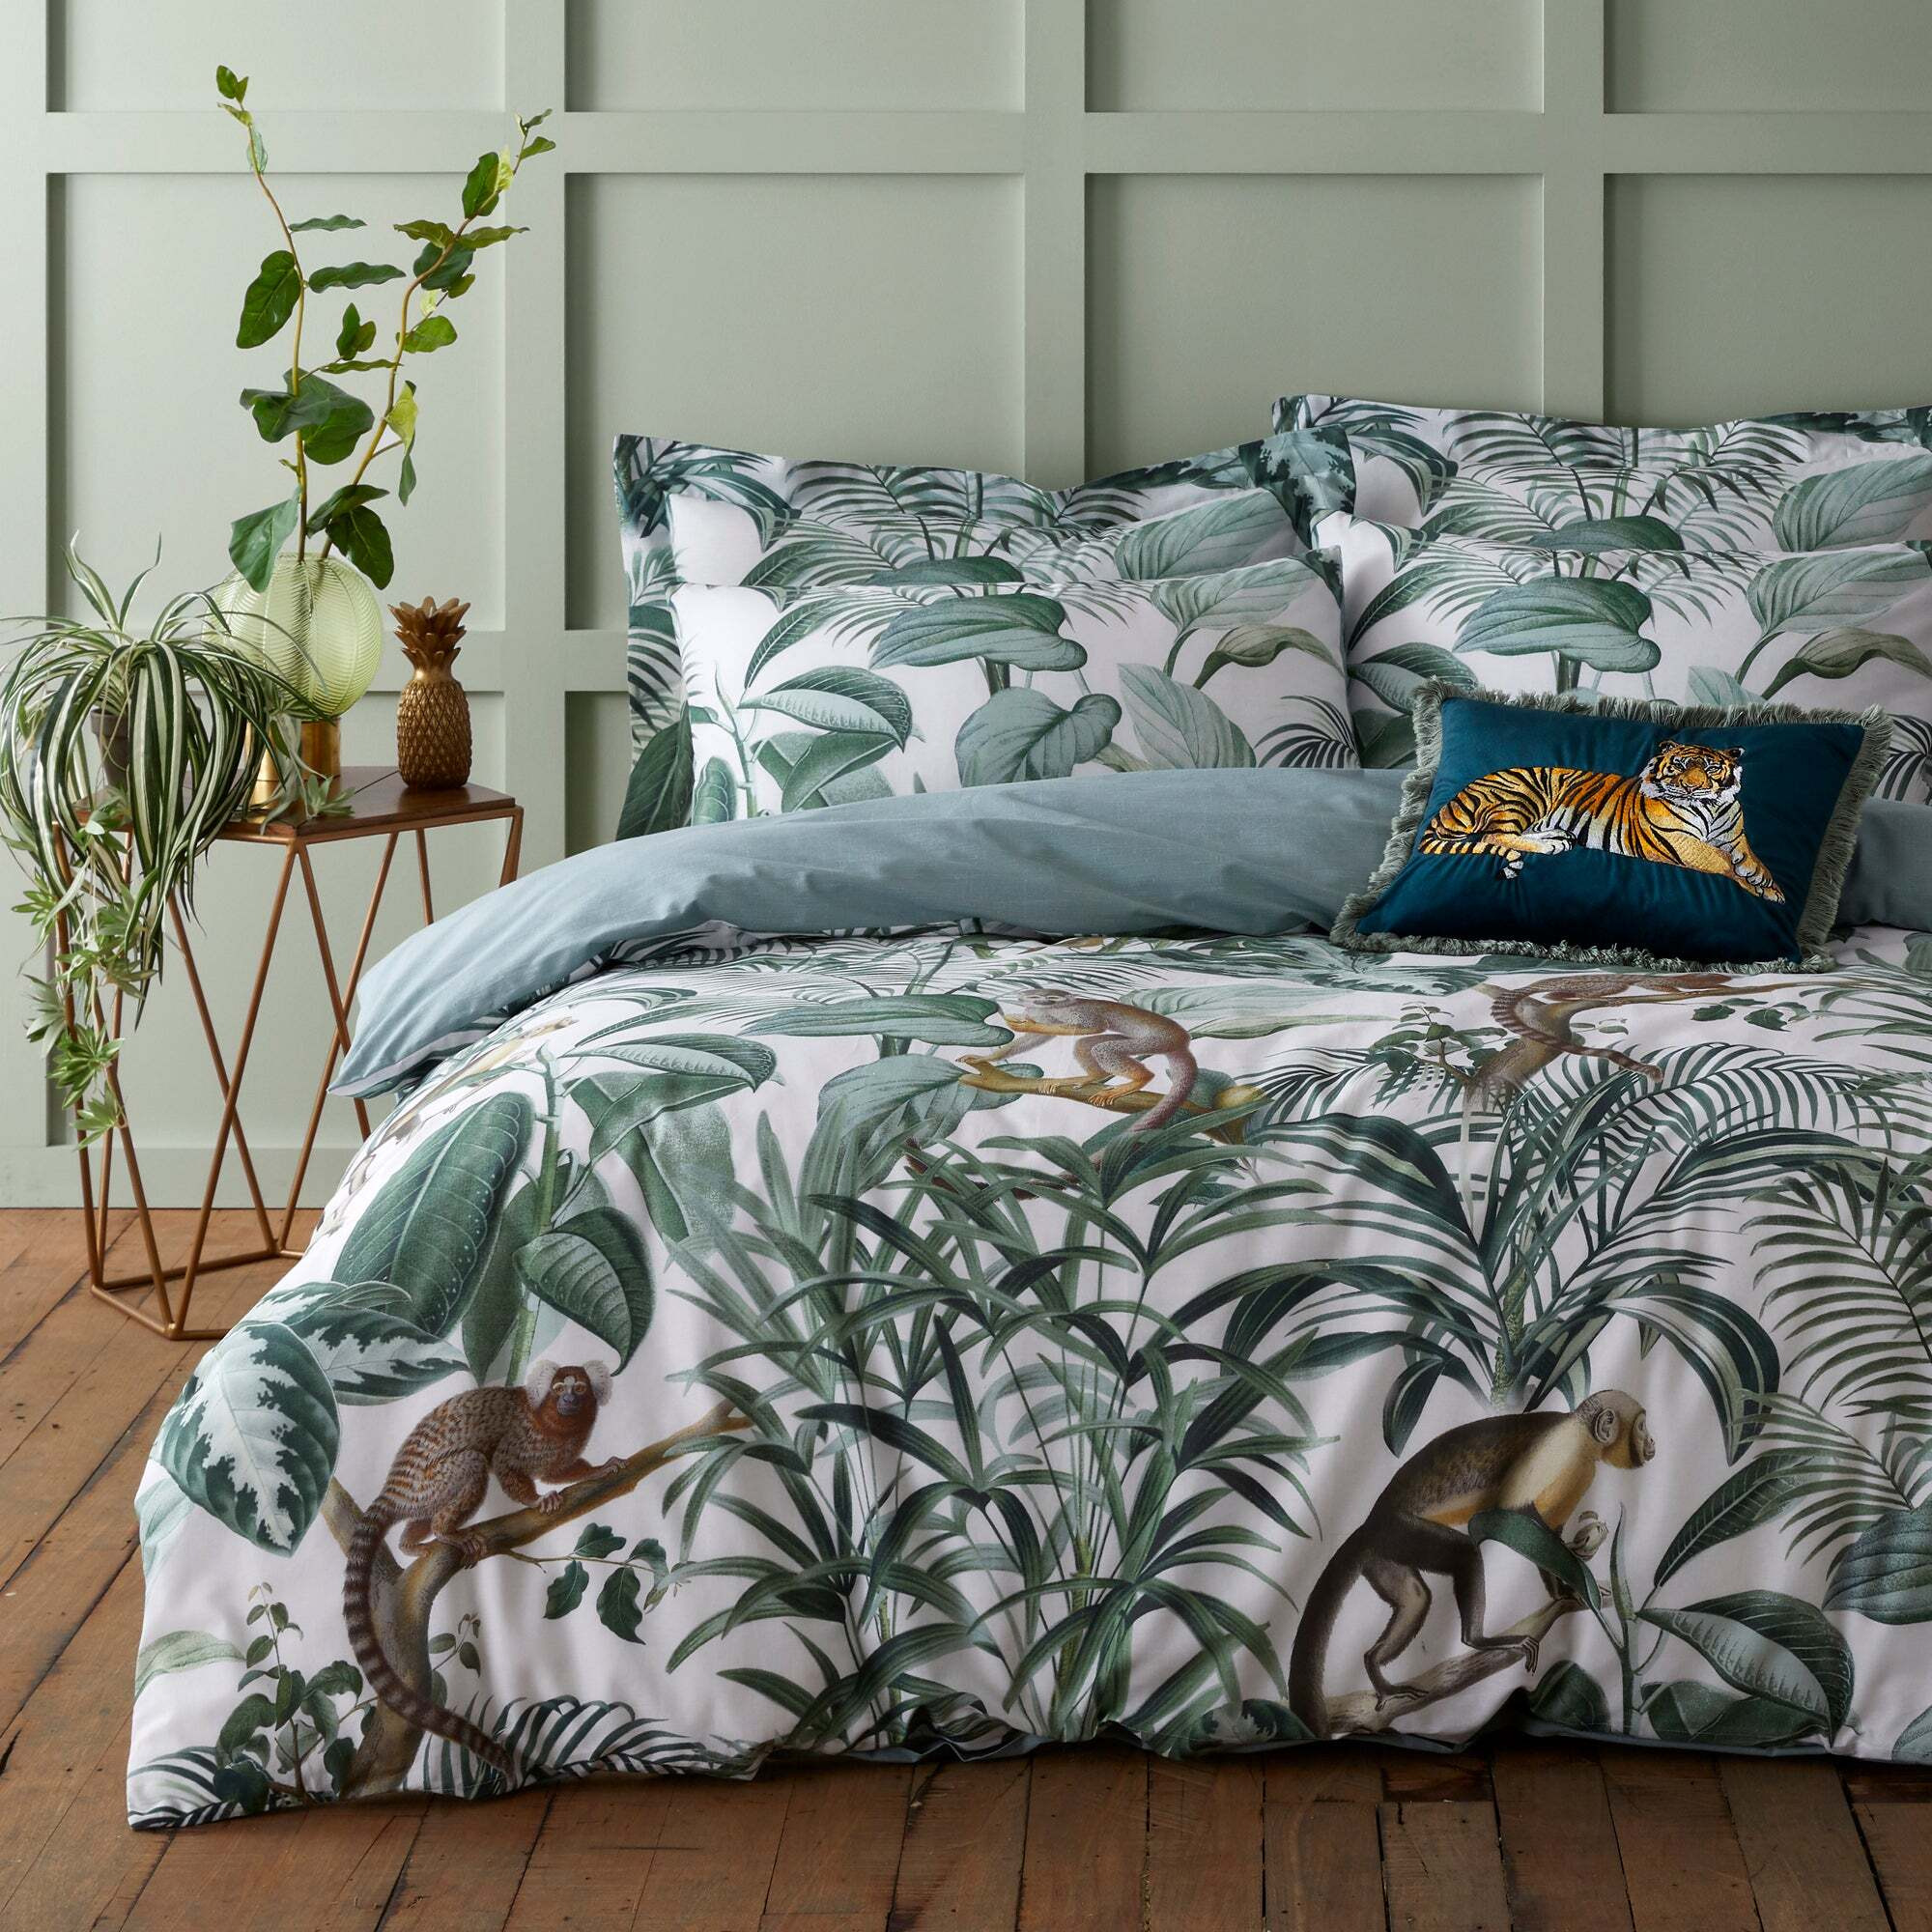 Jungle Green 100% Cotton Reversible Duvet Cover and Pillowcase Set Green, White and Yellow